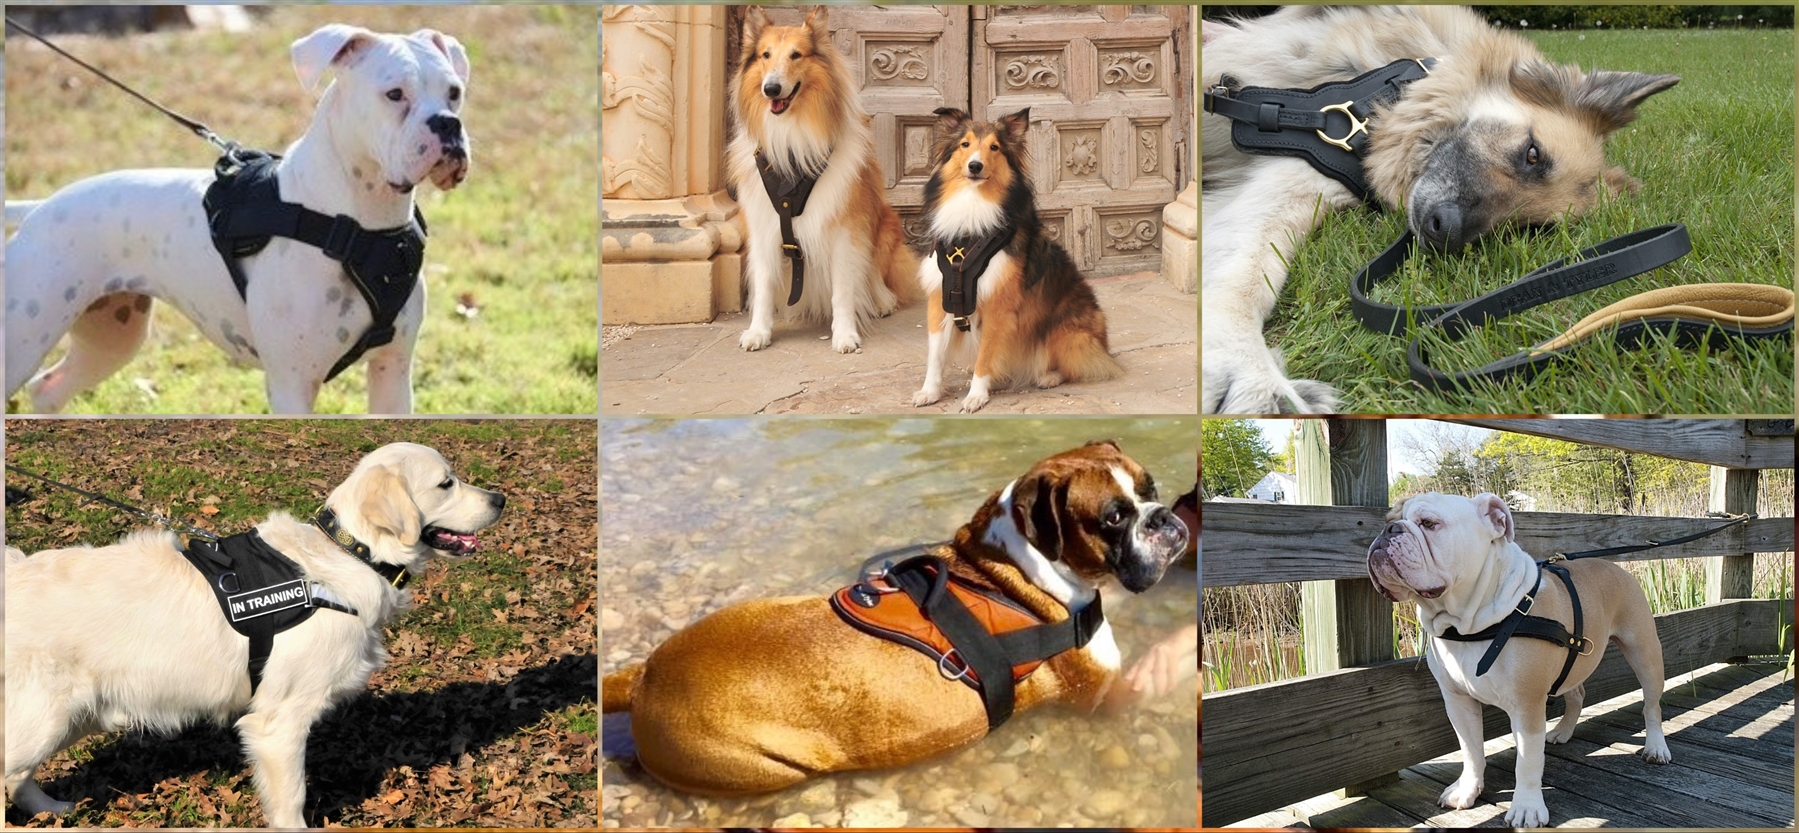 Durable Handmade Dog Harnesses | Dean and Tyler Dog Harnesses